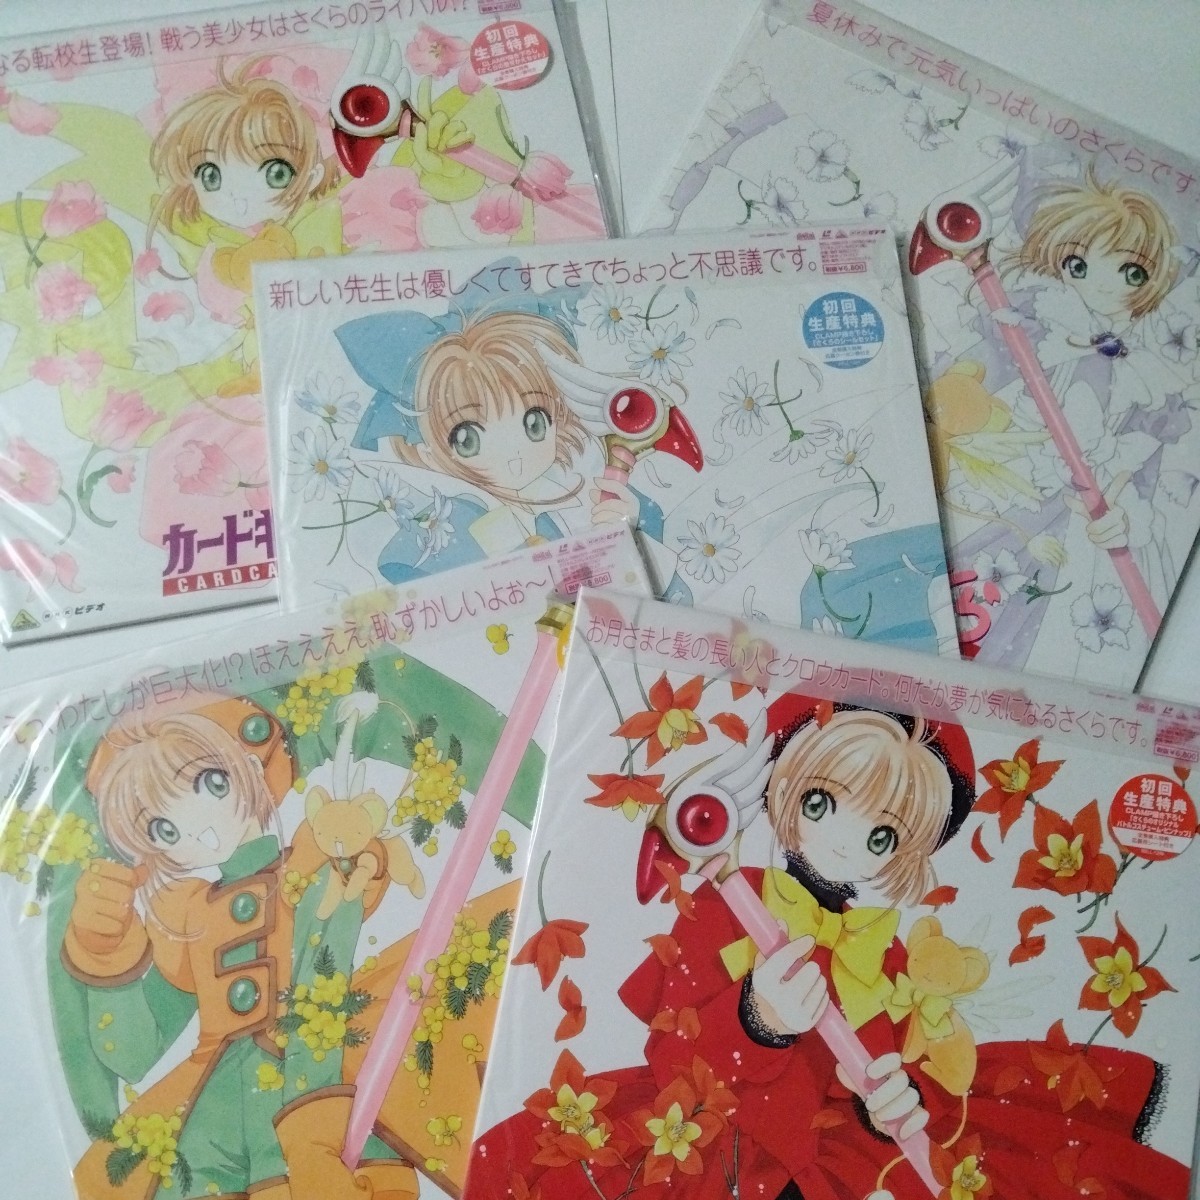  Cardcaptor Sakura 1~9 volume 35 story LD laser disk storage BOX the first times with special favor secondhand goods box scratch equipped beautiful goods . reproduction is possible . is unknown 